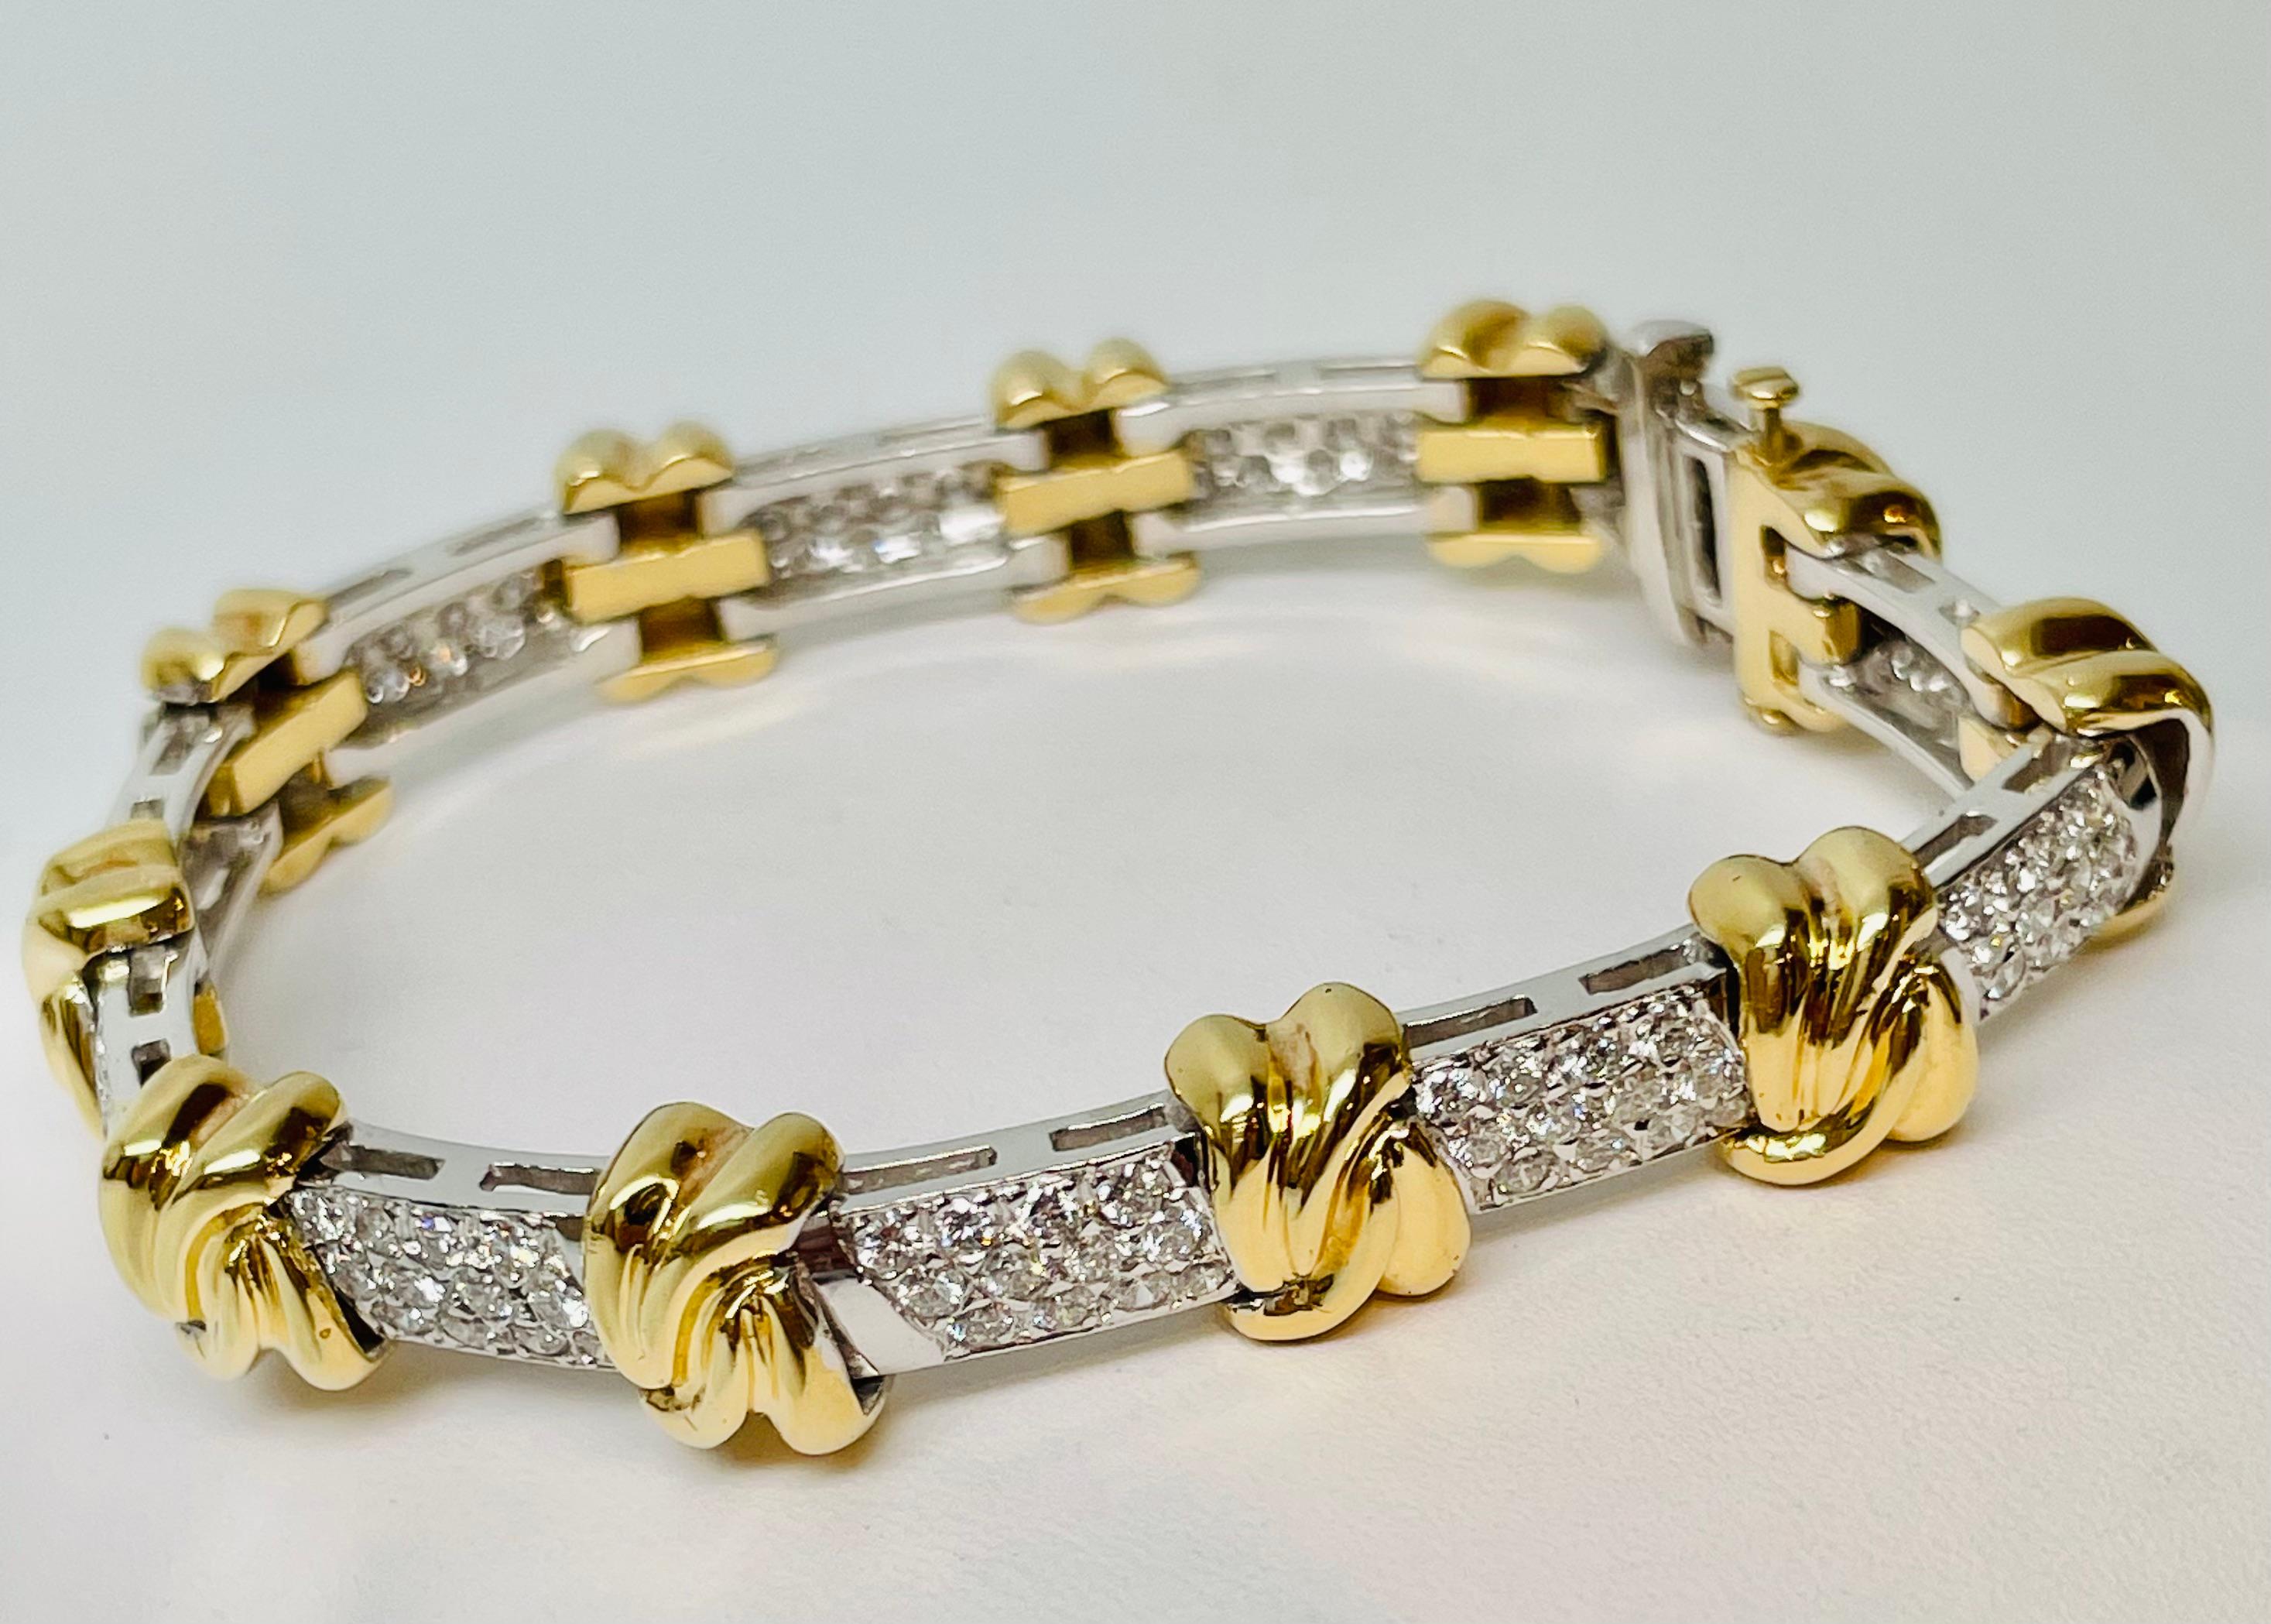 Fabulous 18kt Yellow and White Gold classic, chunky diamond bracelet with bright white diamonds. Important piece with lots of sparkle! Handcrafted beautiful design of pave diamonds separated by yellow gold knots.  It is set with 133 Round Brilliant